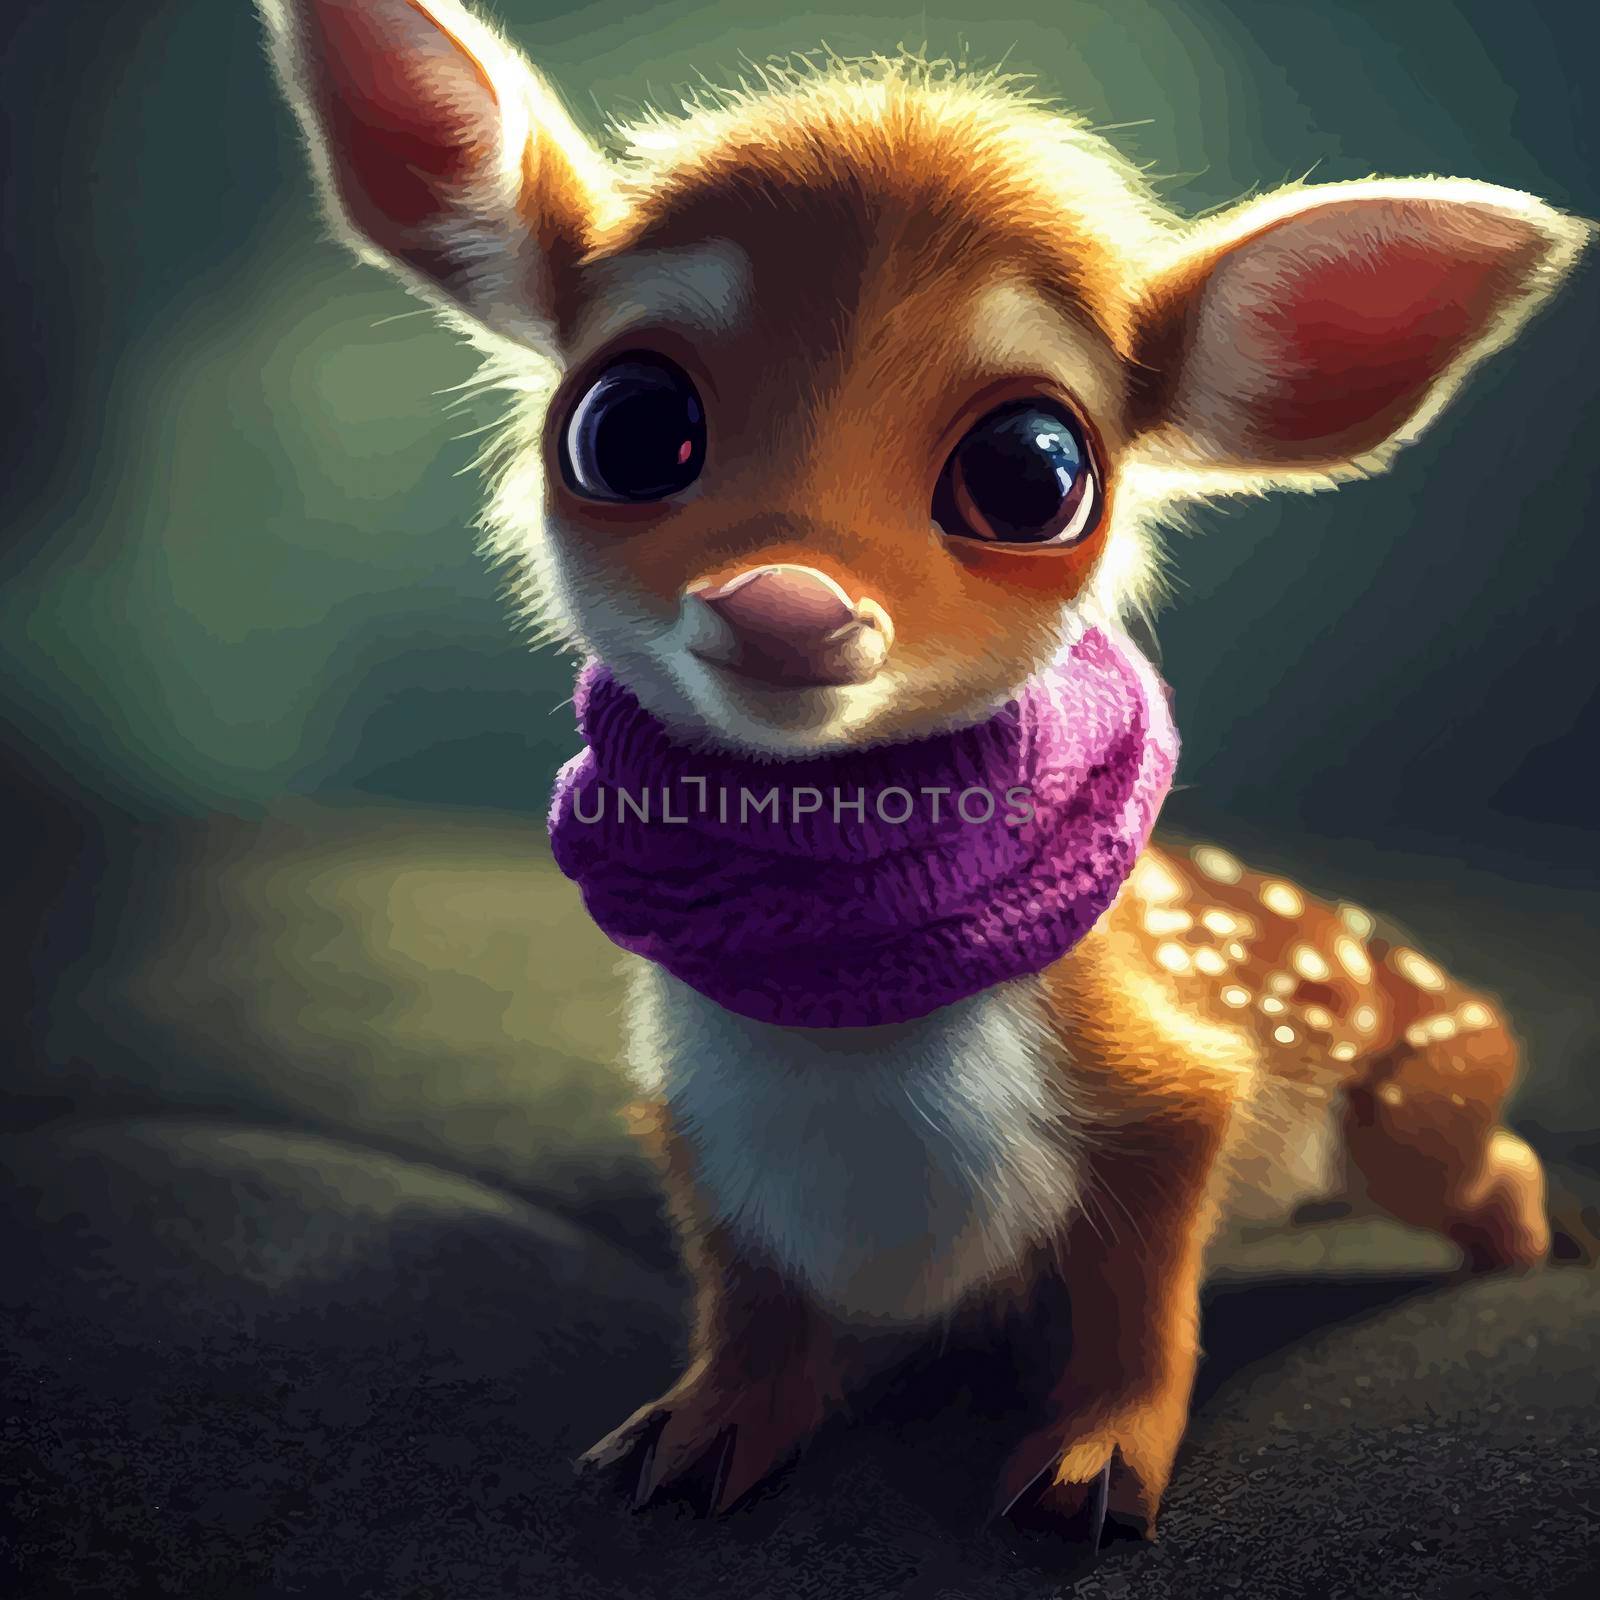 animated illustration of a cute scarf, animated baby scarf portrait by JpRamos